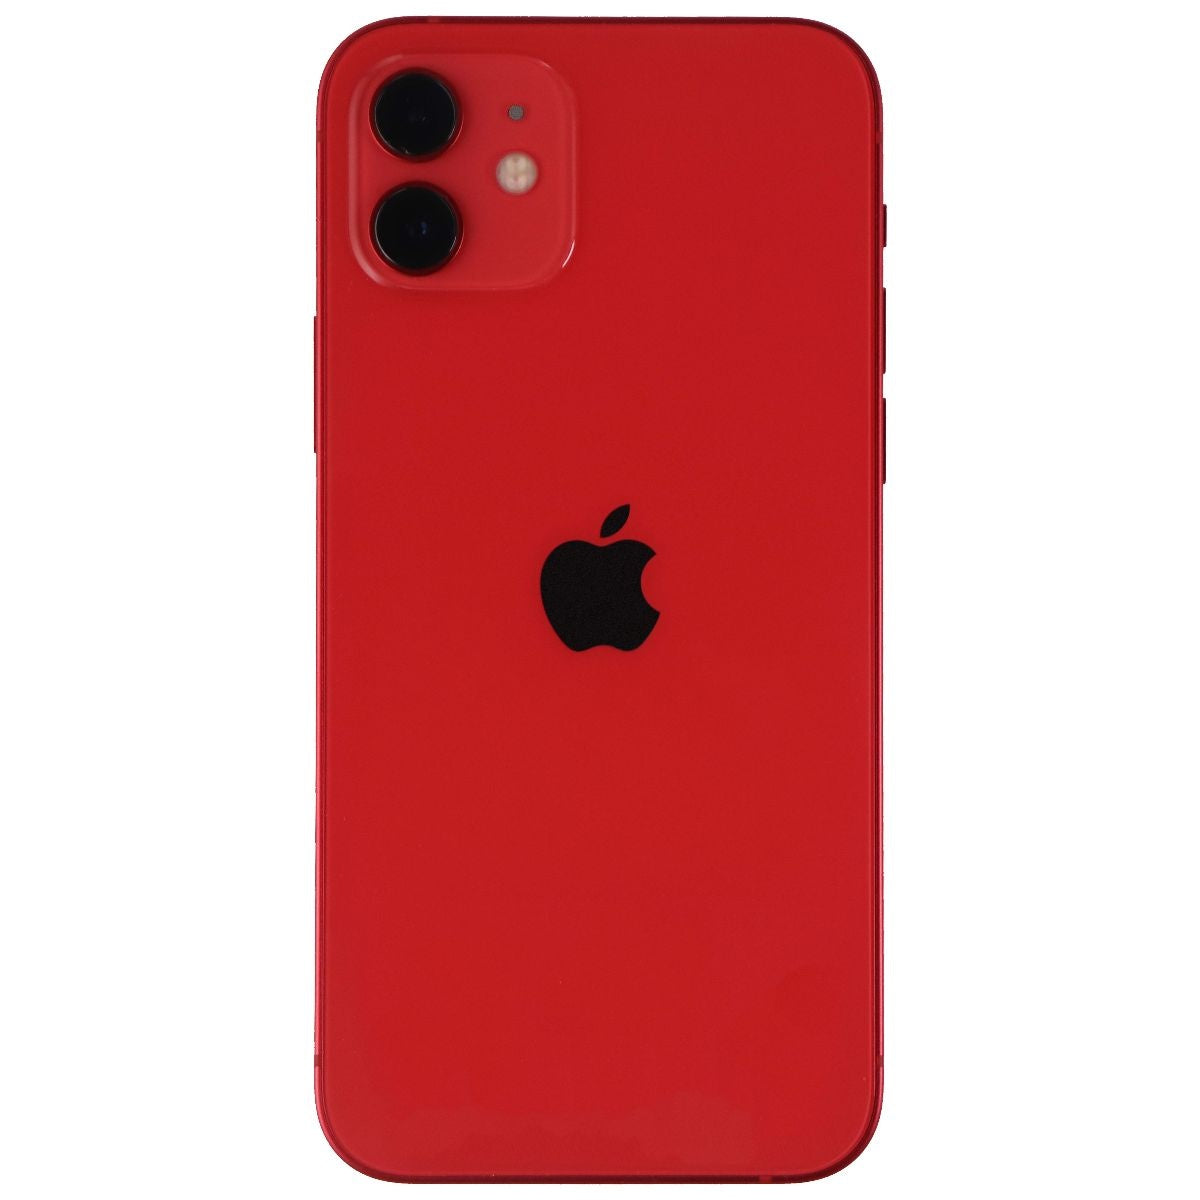 Apple iPhone 12 (6.1-inch) (A2172) C Spire Network Only - 64GB / (Product) RED Cell Phones & Smartphones Apple    - Simple Cell Bulk Wholesale Pricing - USA Seller